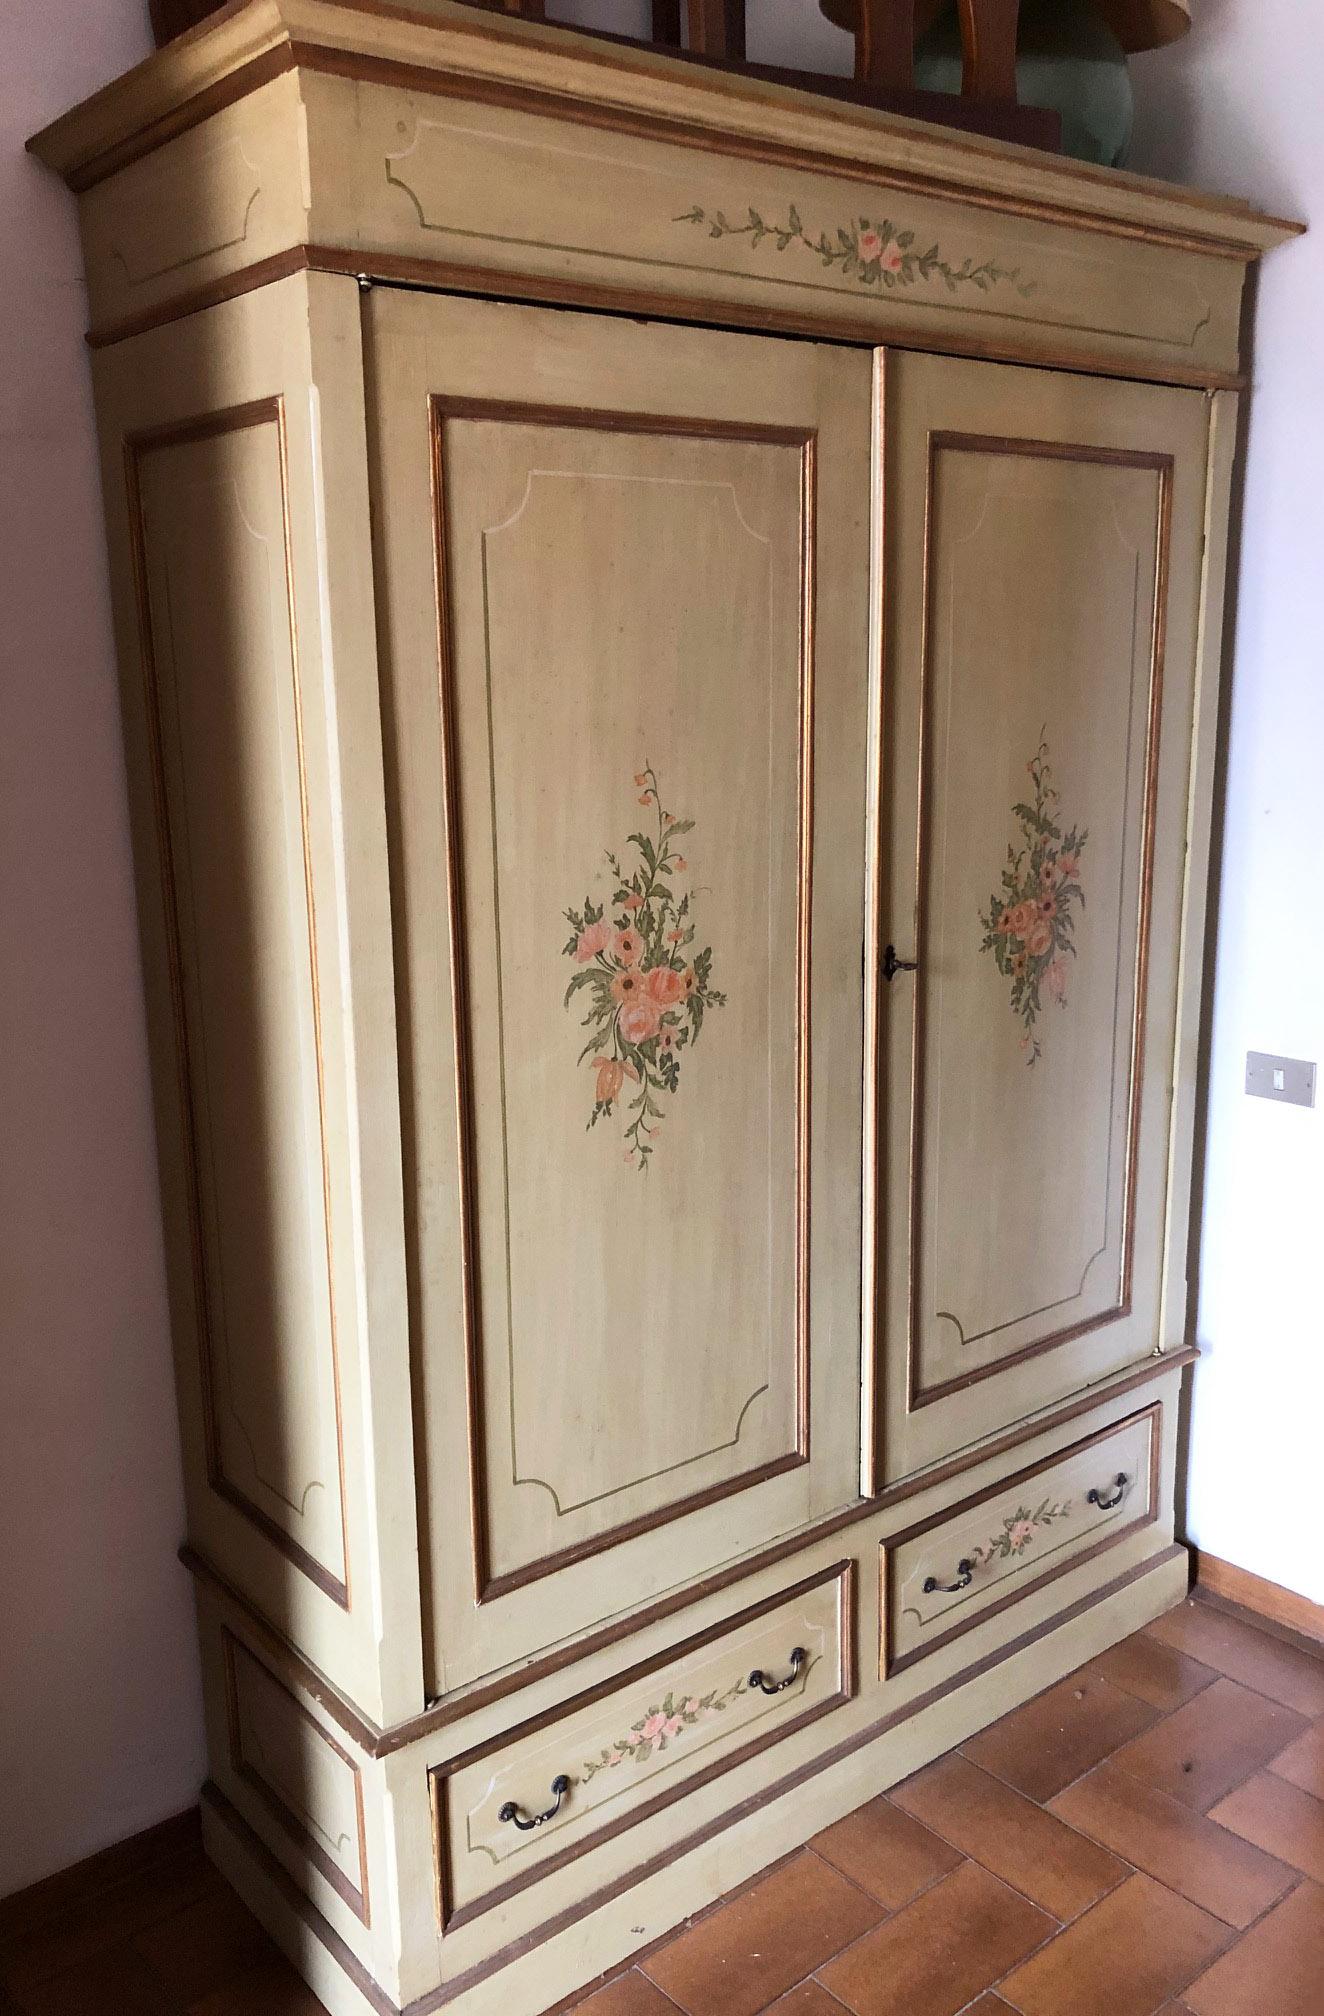 Fir wardrobe, original antique, completely disassembled, painted and decorated by hand.
Original from the early 20th century in Tuscany.
Inside is a clothes rail, and a shelf at the bottom.
Two very large drawers on the outside
The measure in cm